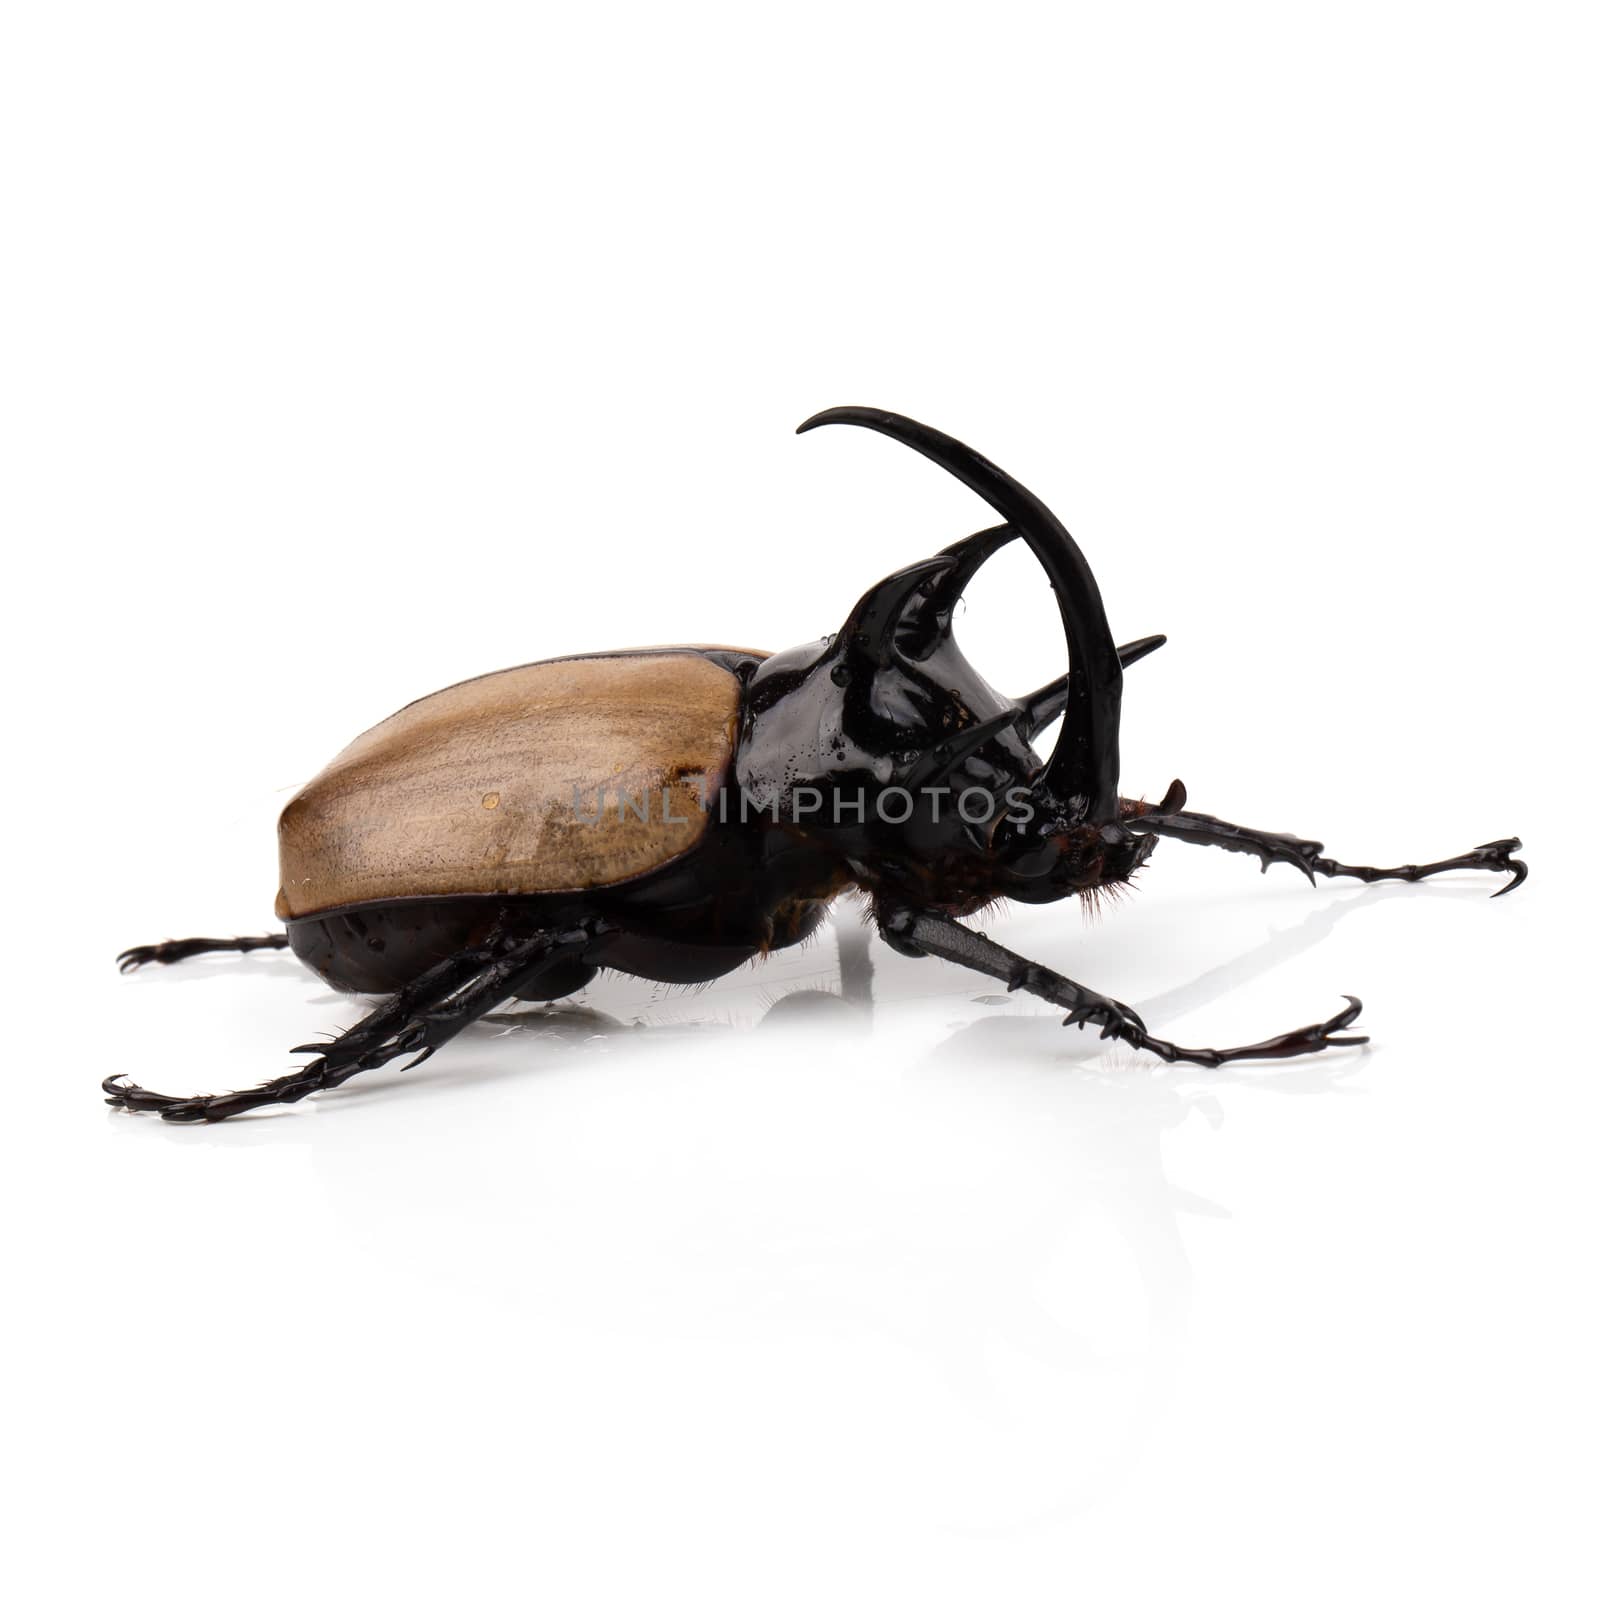 Yellow Five-horned rhinoceros beetle isolated on white backgroun by kaiskynet